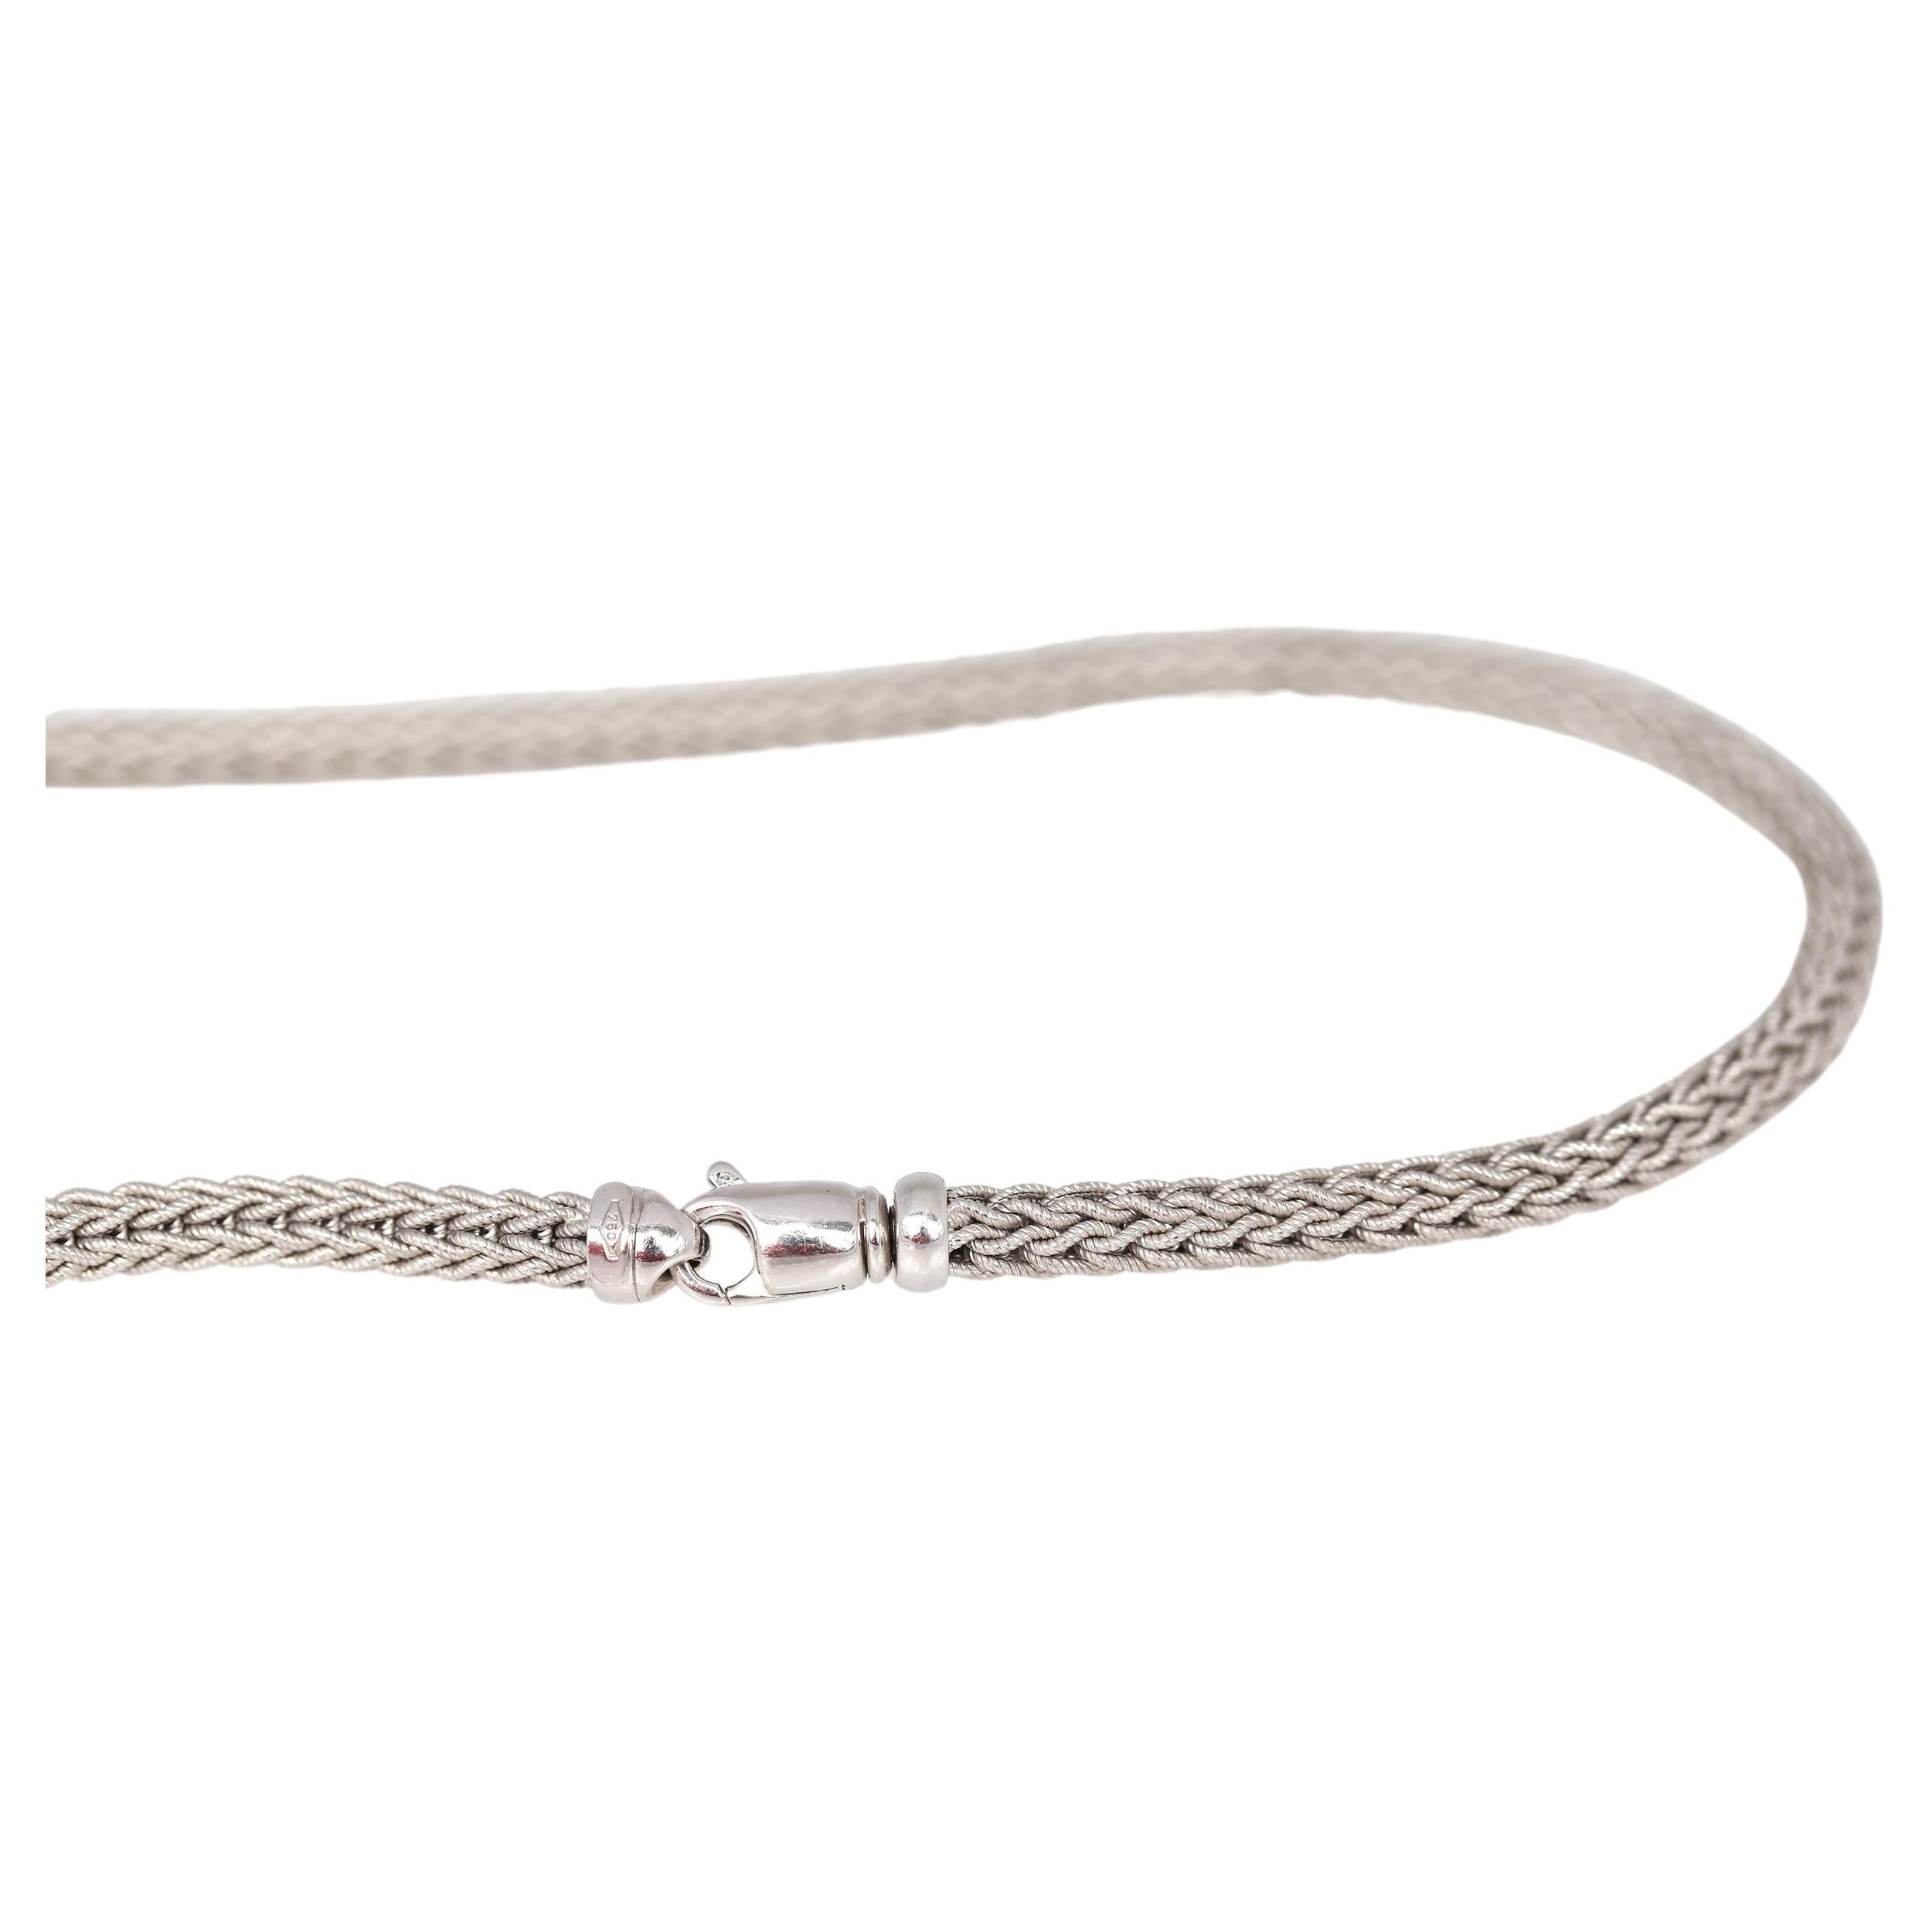 18K White Gold Chain Cord Snake or Fox Tail Link. Created in 1990,  it is still modern and only gains in value.

Beautiful snake-like 18K White Gold chain. Almost 17 inches (43 cm) in length. Fine craft of the chain with neatly woven links create a